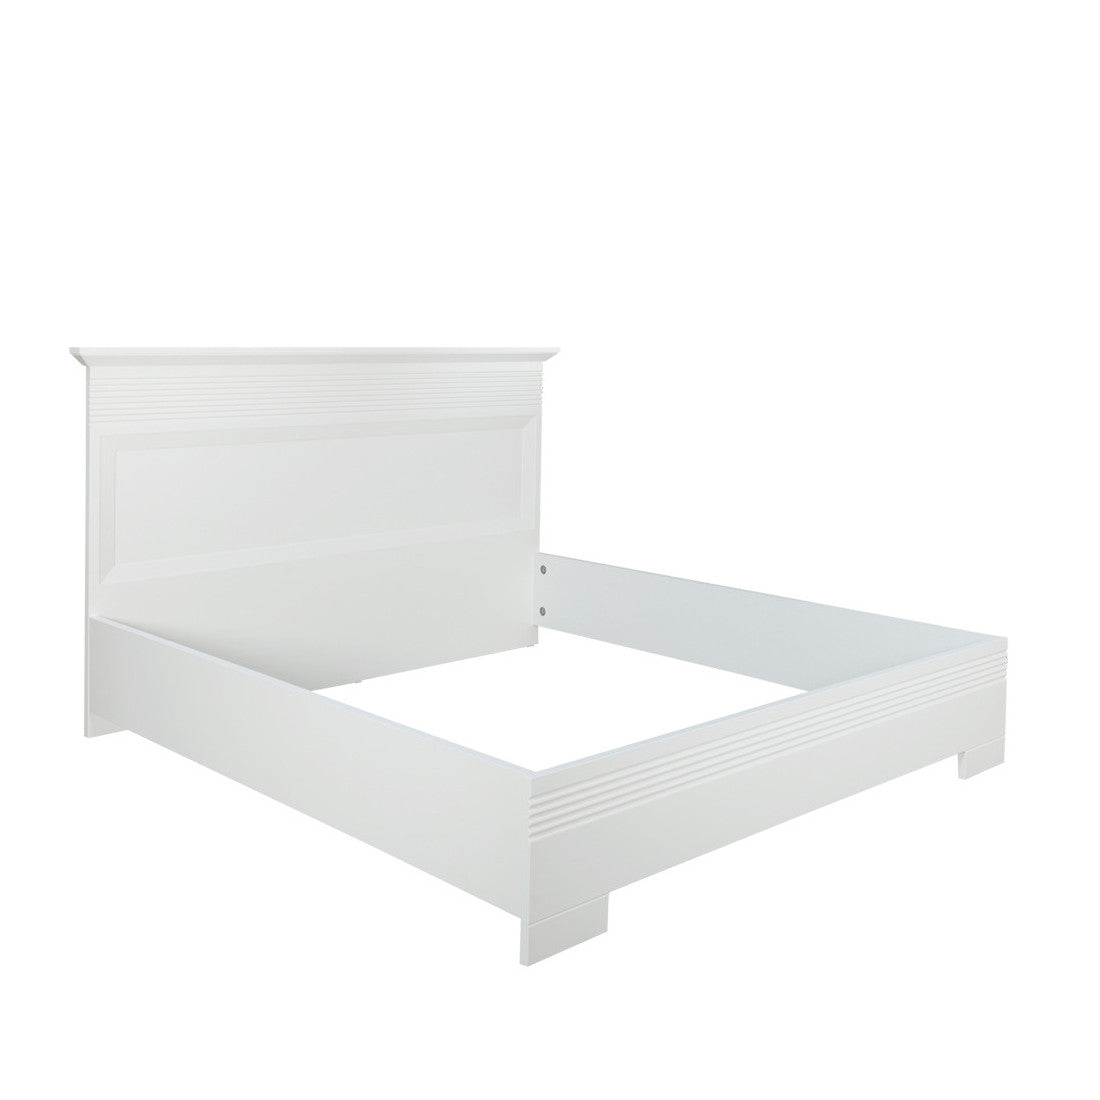 Verona Bianco Bedroom Set, Bed With Mattress Size 160 X 200 Cm, 2 Bedside Tables And Wardrobe